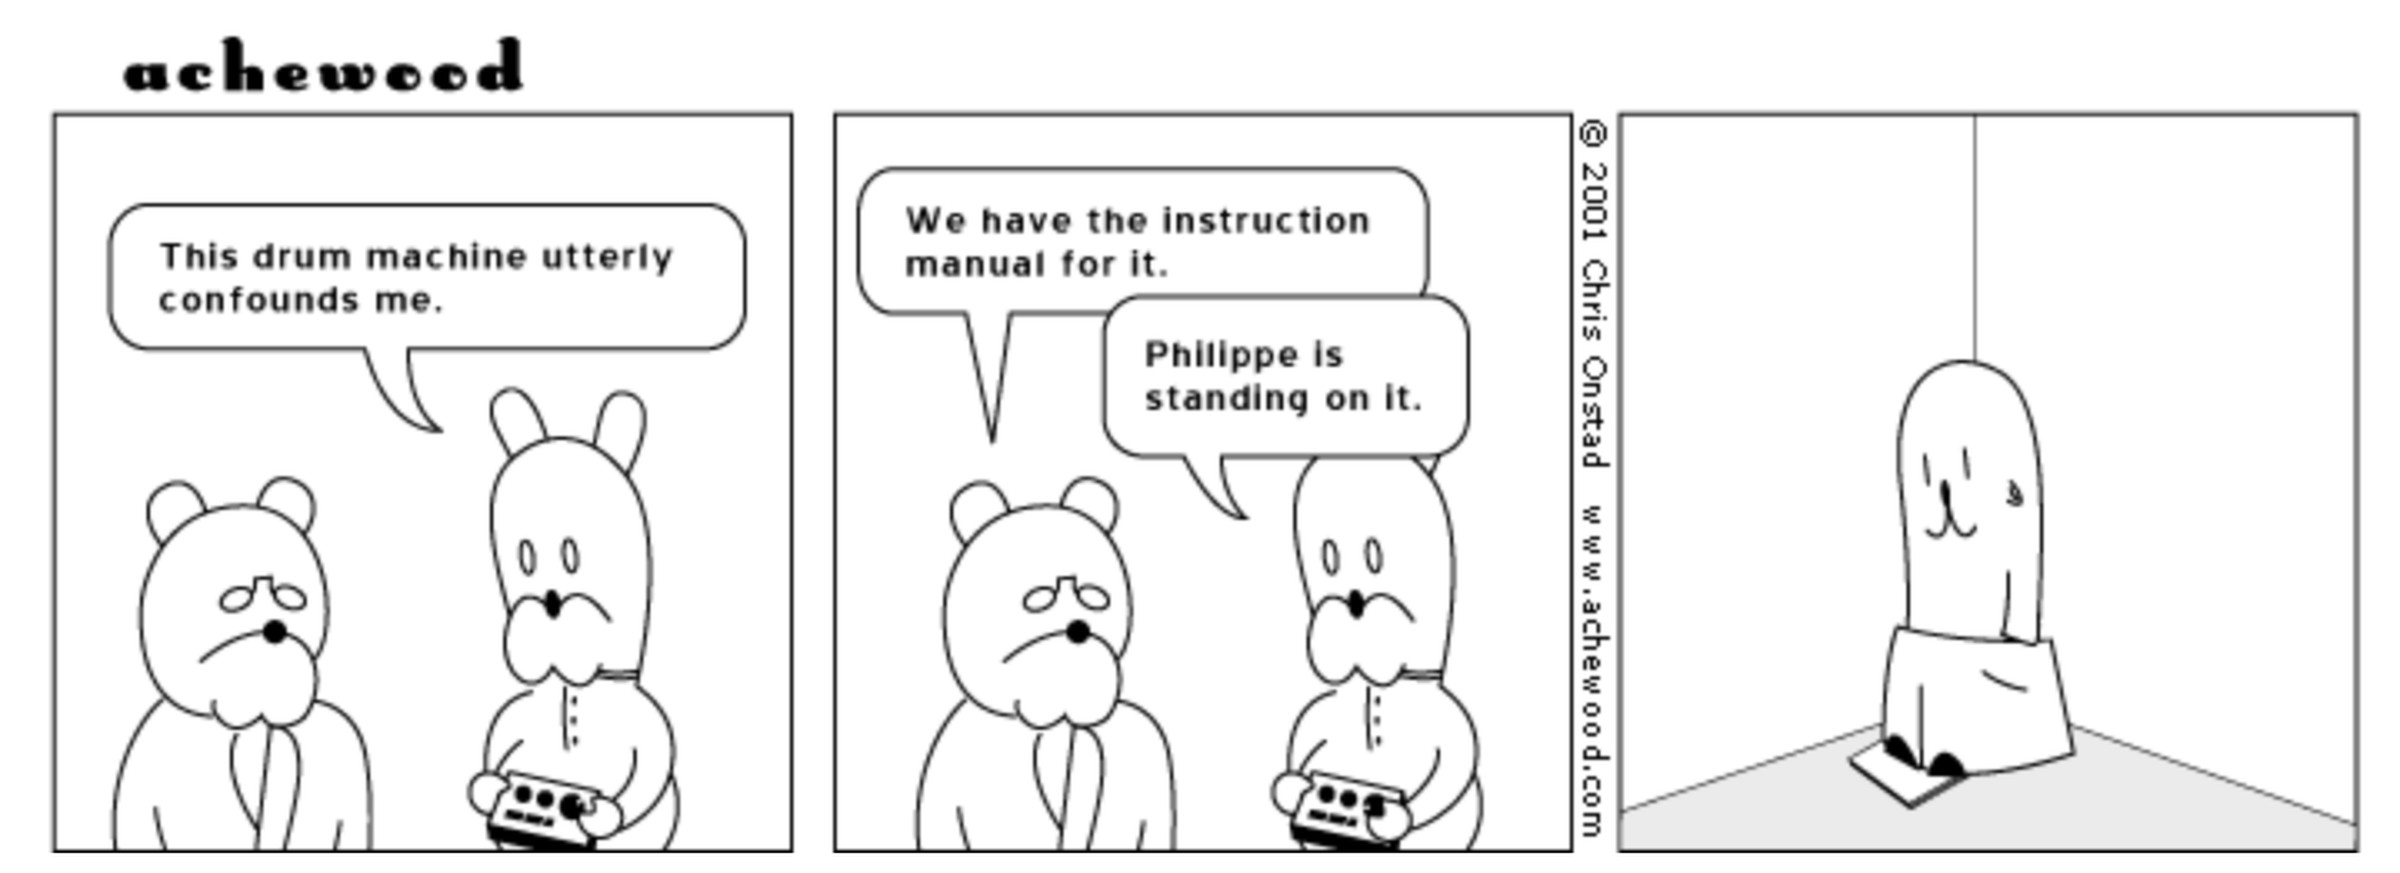 First panel: Téodor tells Cornelius Bear, “This drum machine utterly confounds me.” Second panel: Cornelius says, “We have the instruction manual for it.” Téodor replies, “Philippe is standing on it.” Third panel: A confused-looking otter is standing on a book in a corner.